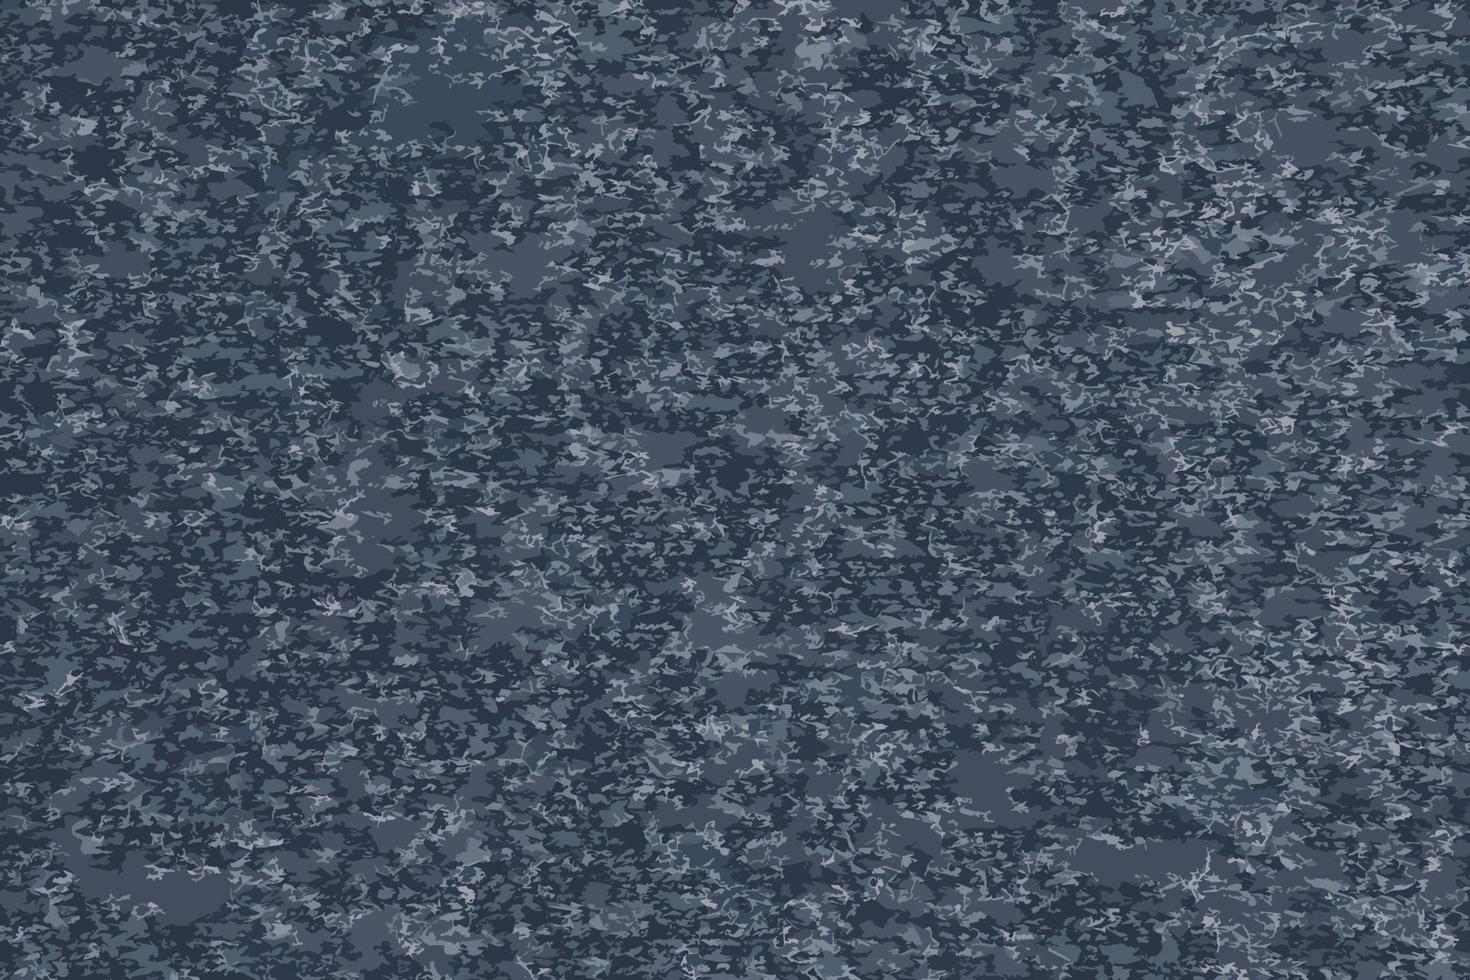 Realistic vector illustration of Texture of blue knitted fabric. Abstract modern knitted texture in blue color. Dark knitted background